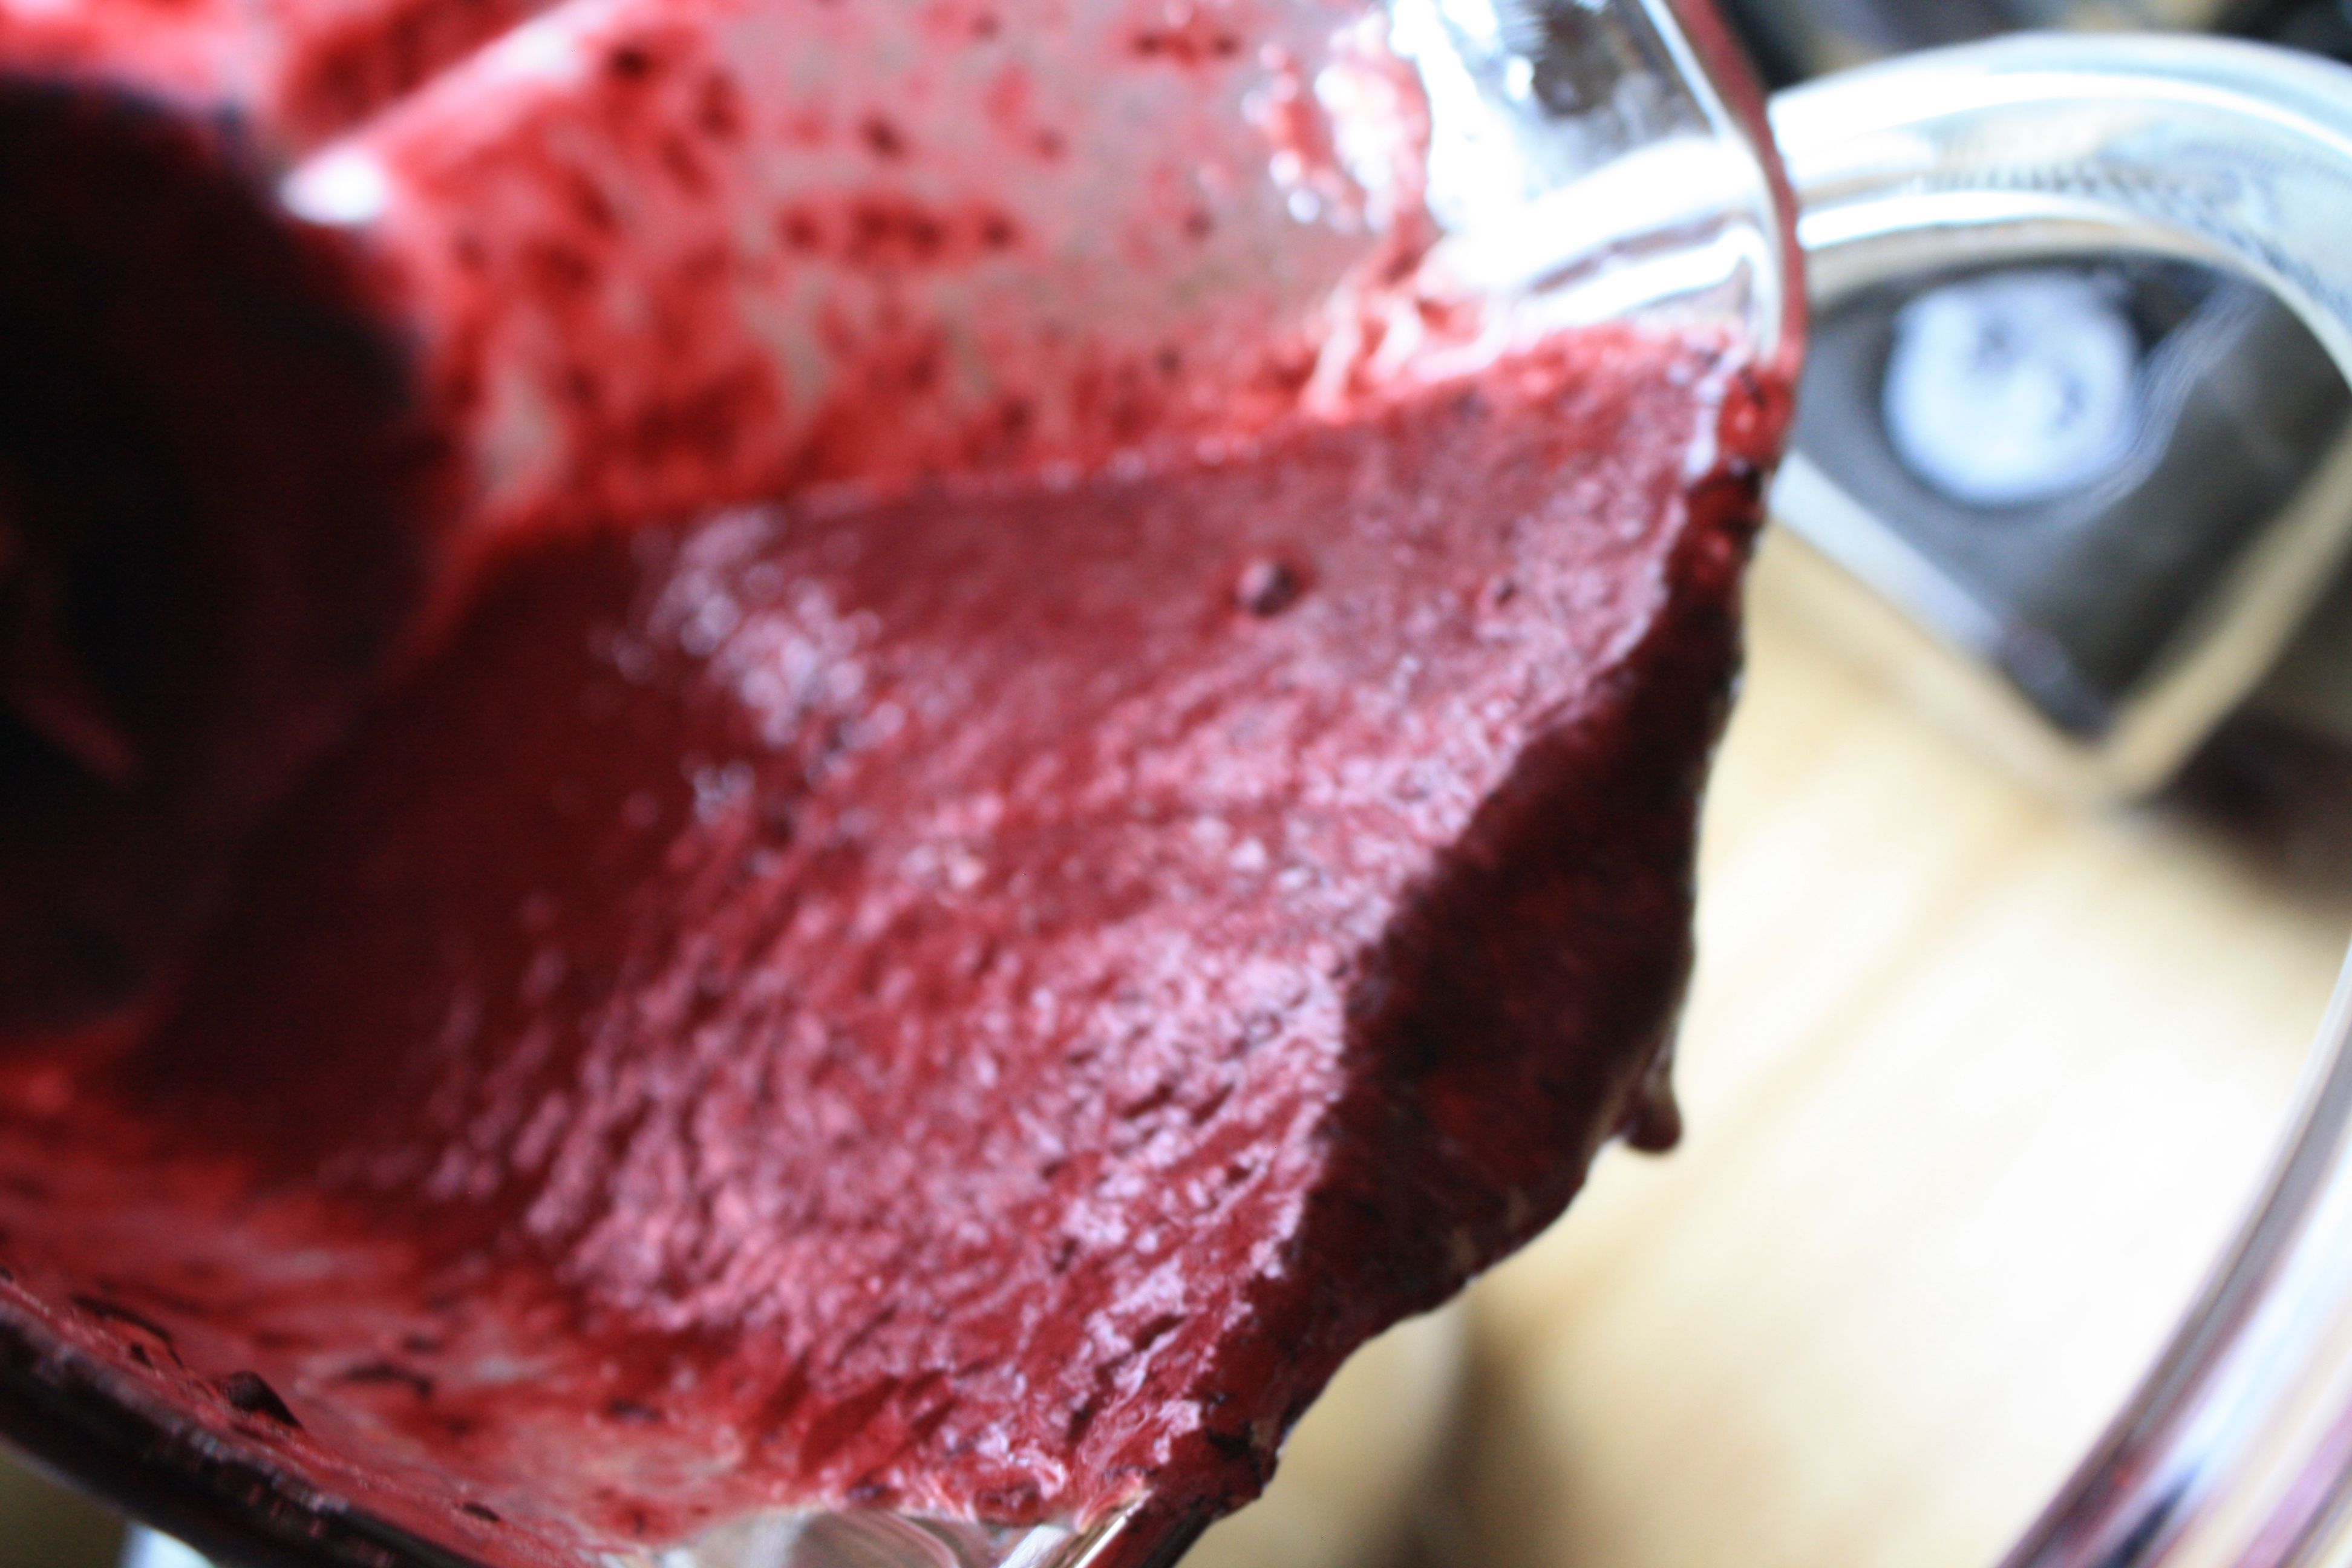 puree concord grape skins & pulp until smooth or just shy of smooth